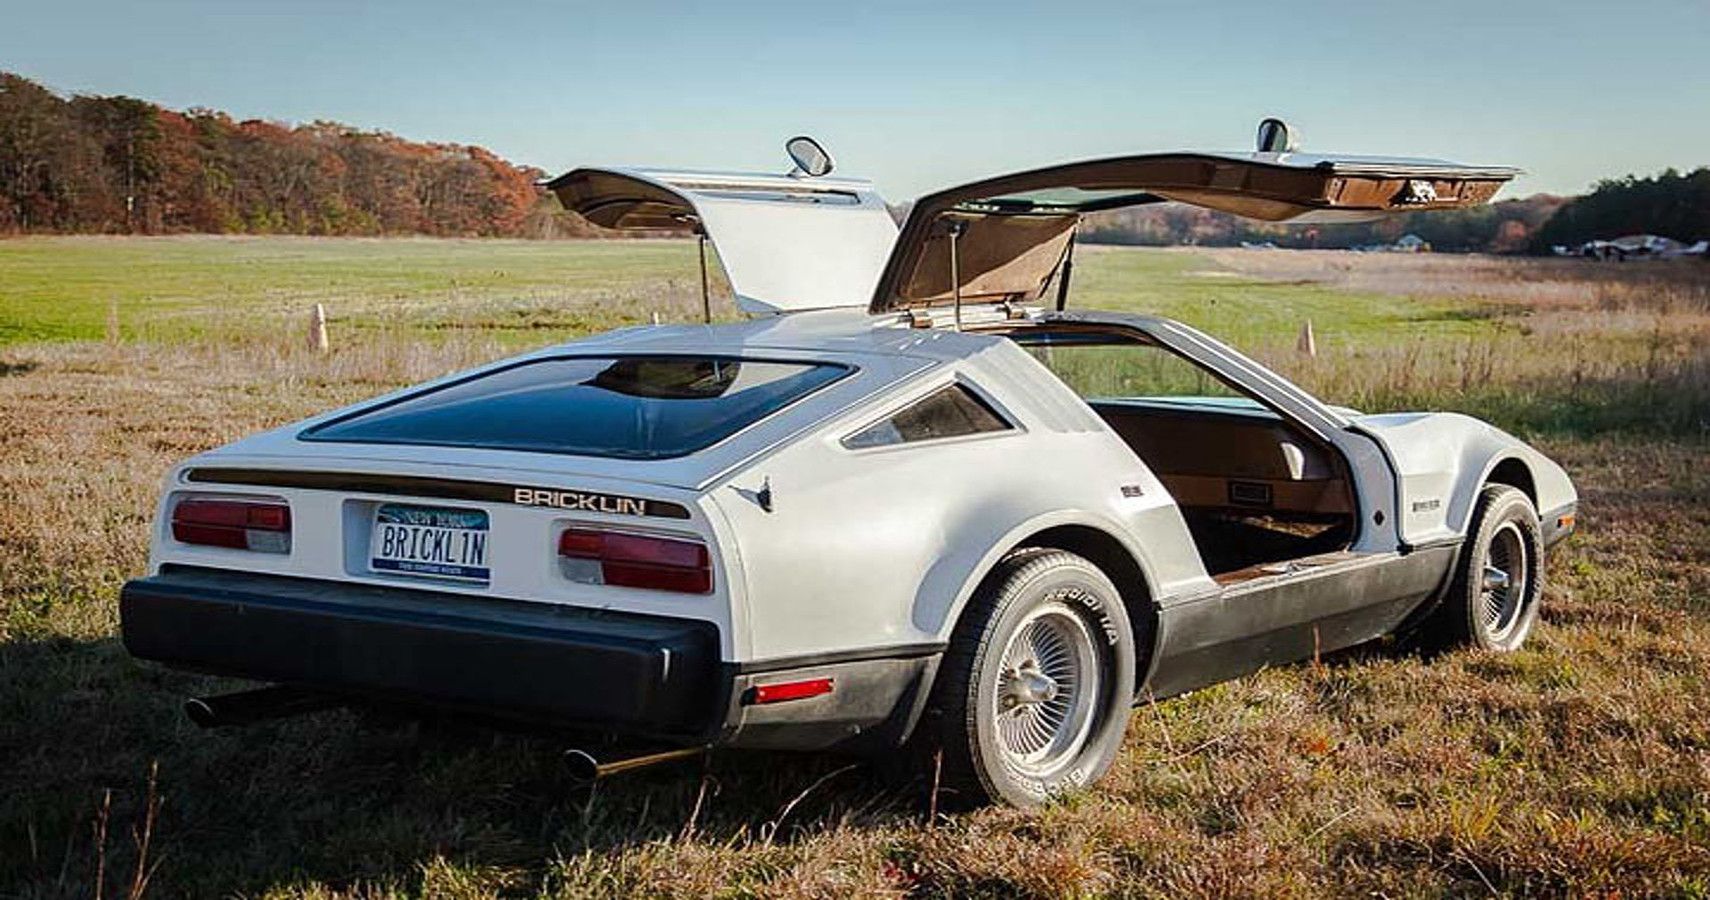 The Bricklin was meant to be a safe sports car